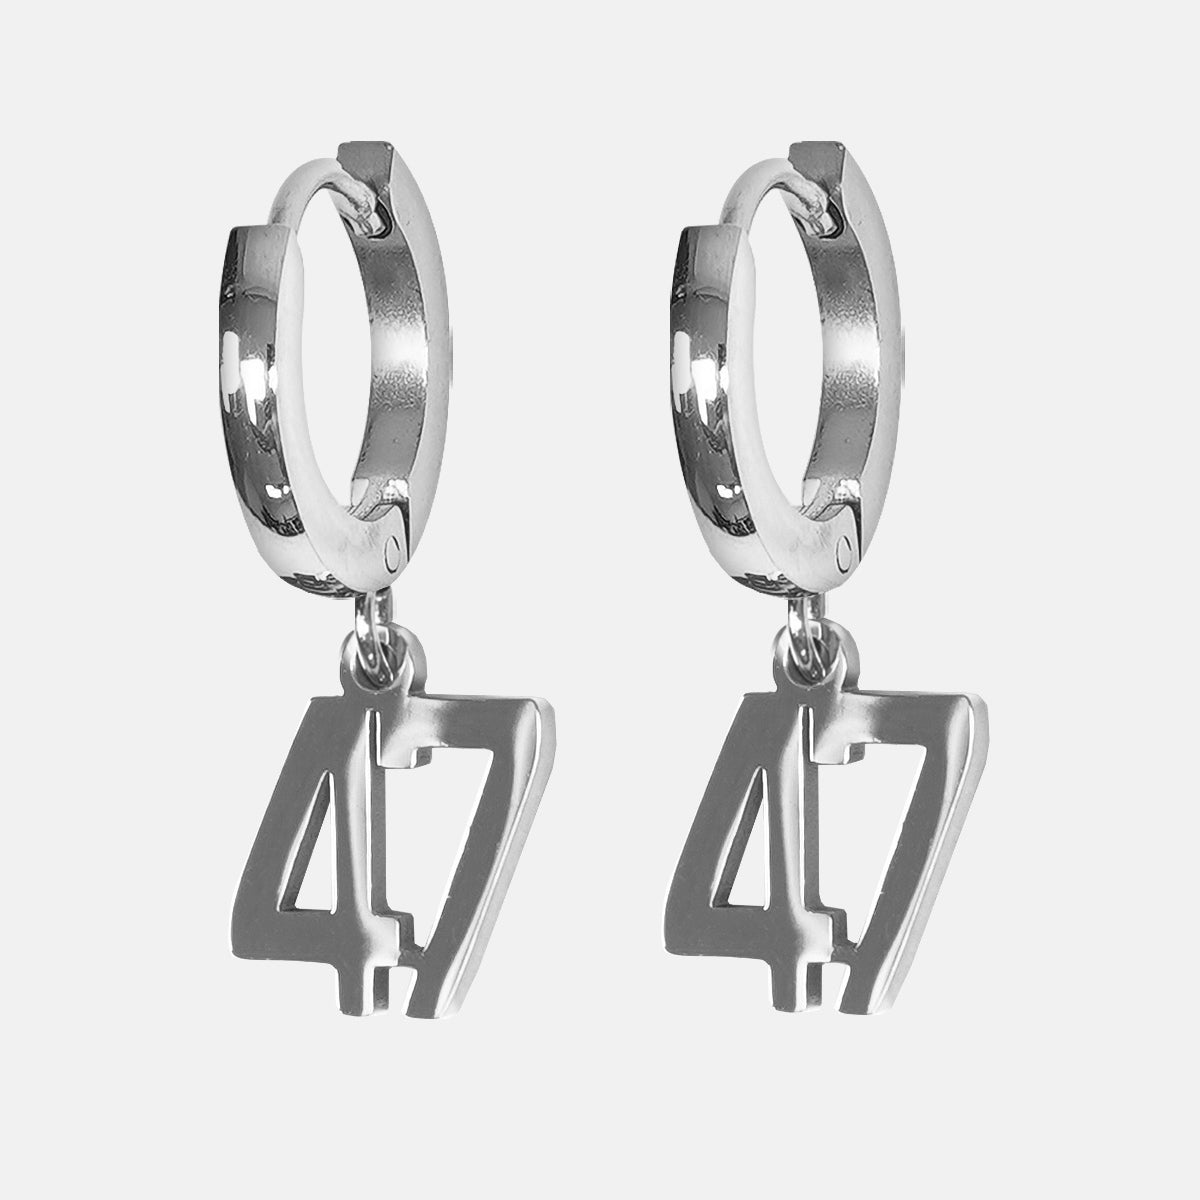 47 Number Earring - Stainless Steel